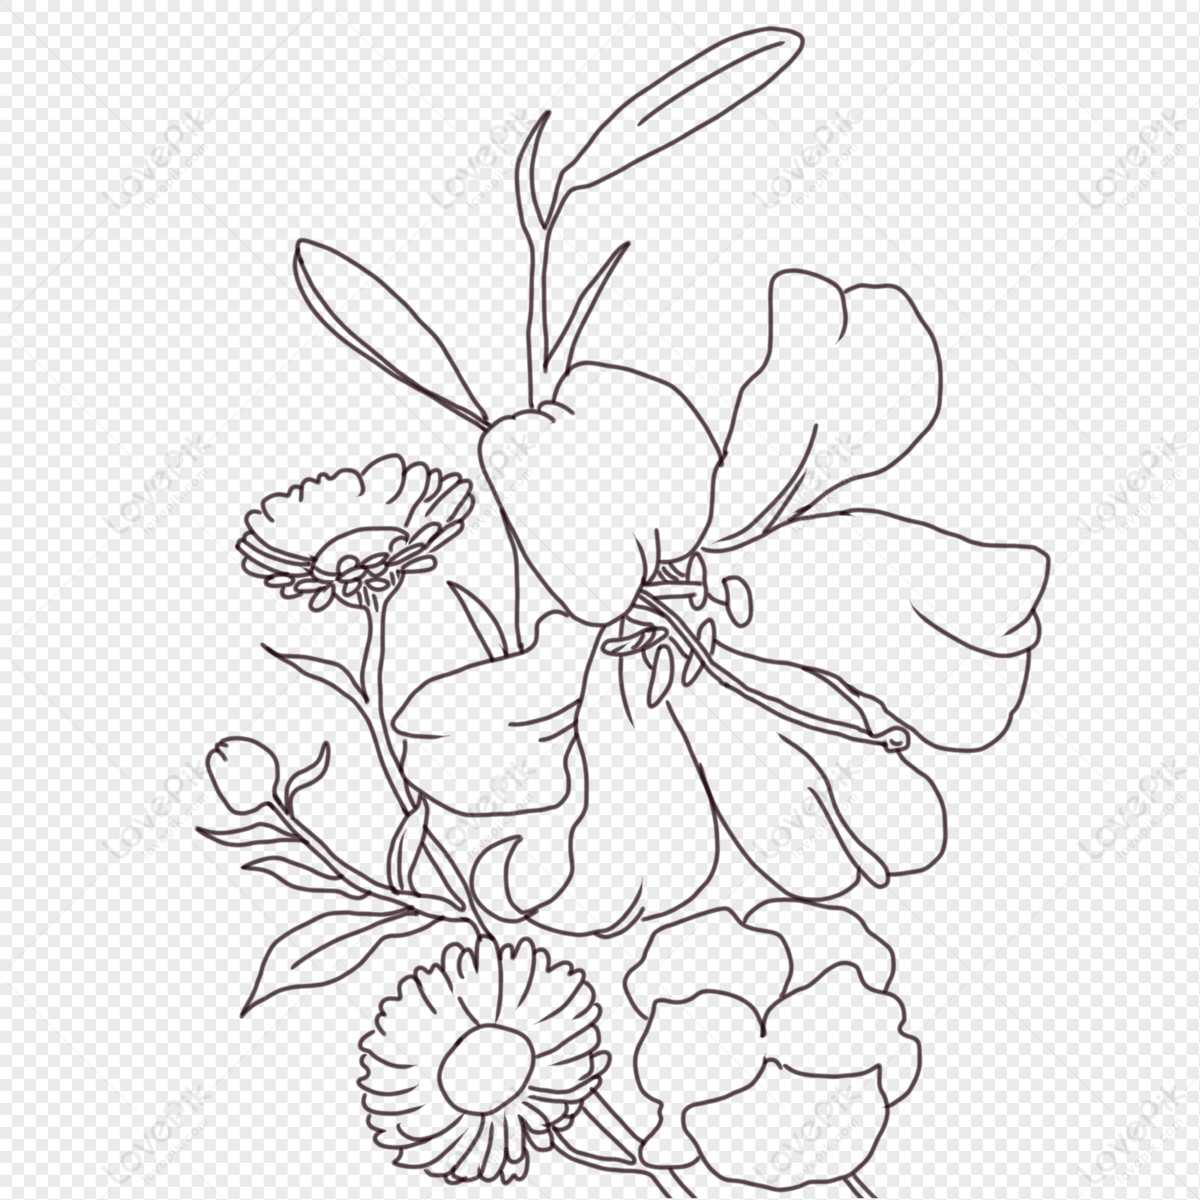 3,000+ Free Flower Drawing & Flowers Images - Pixabay